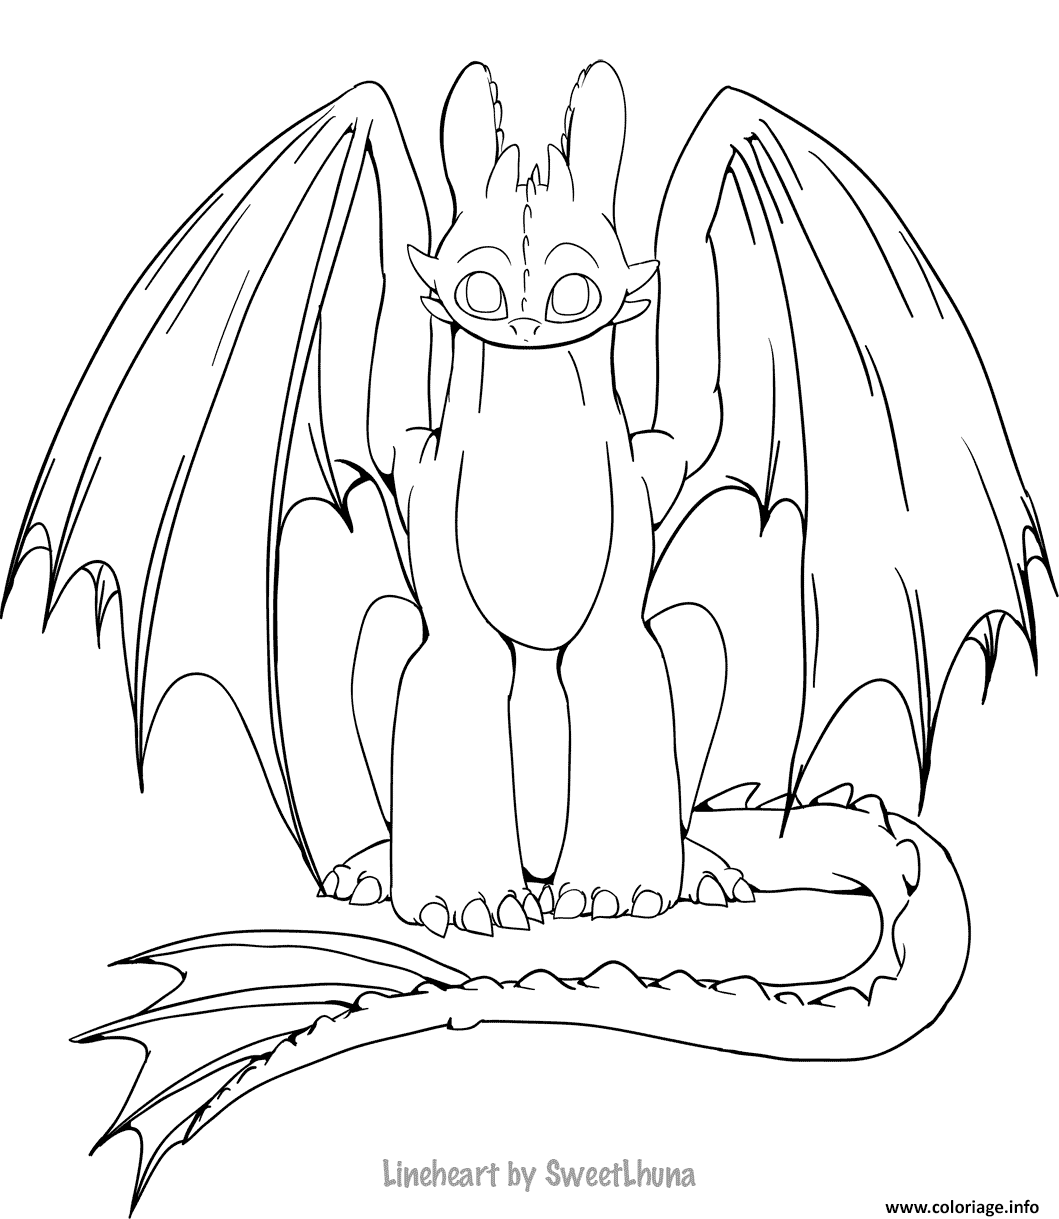 Coloriage Toothless Lineheart By SweetLhuna Dessin à Imprimer